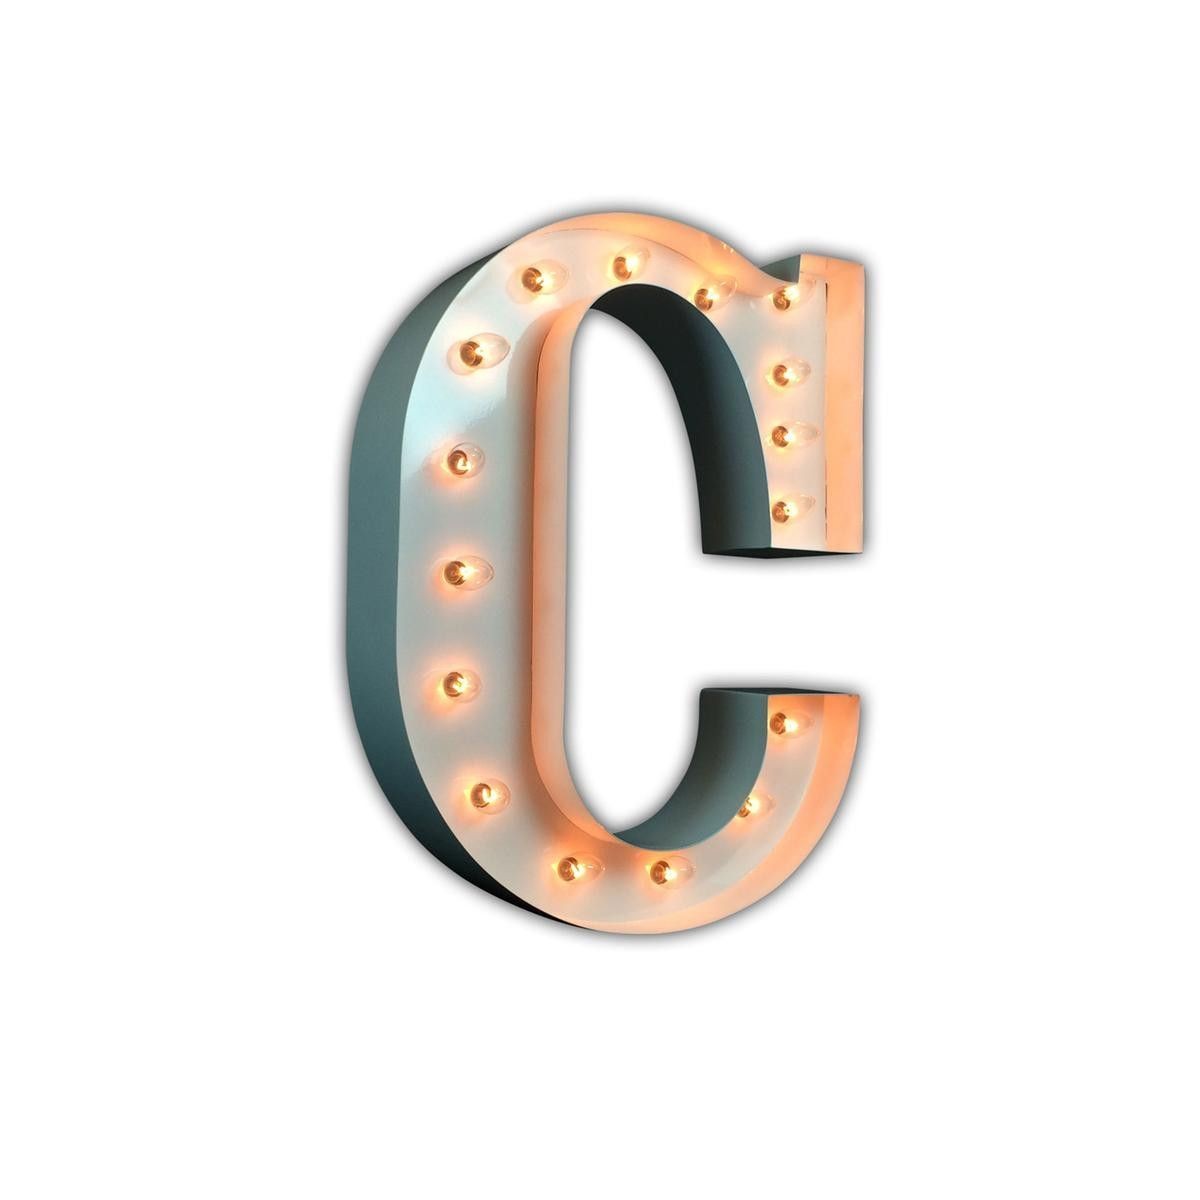 24” Letter C Lighted Marquee Letters White Gloss